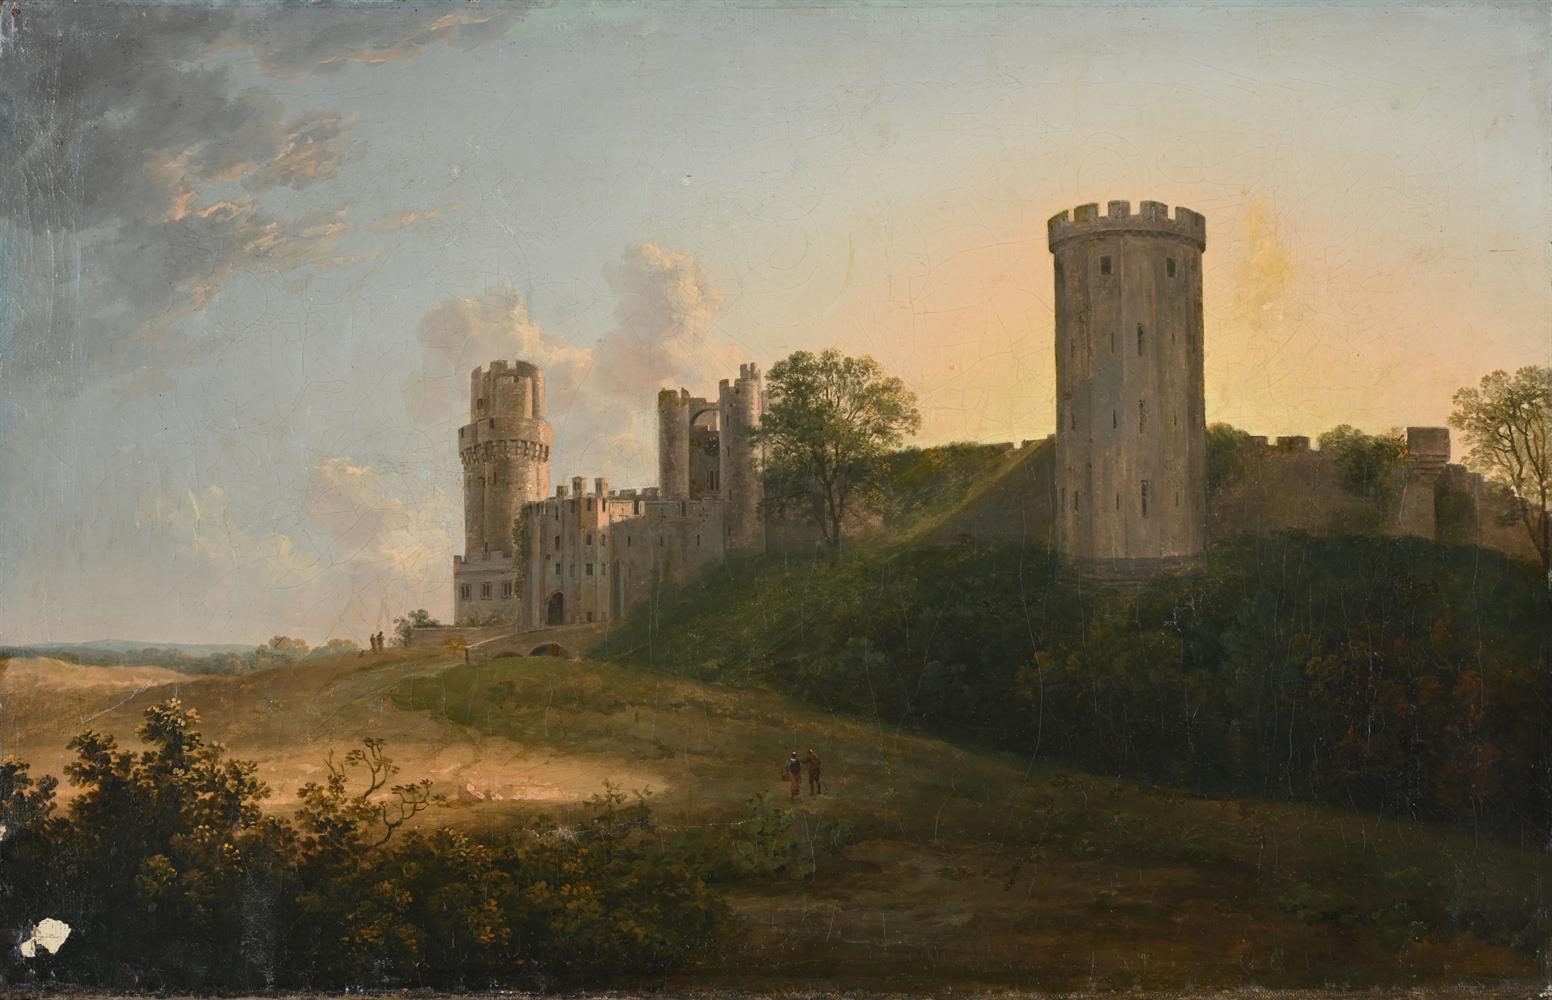 THE ENTRANCE TO WARWICK CASTLE by William Hodges